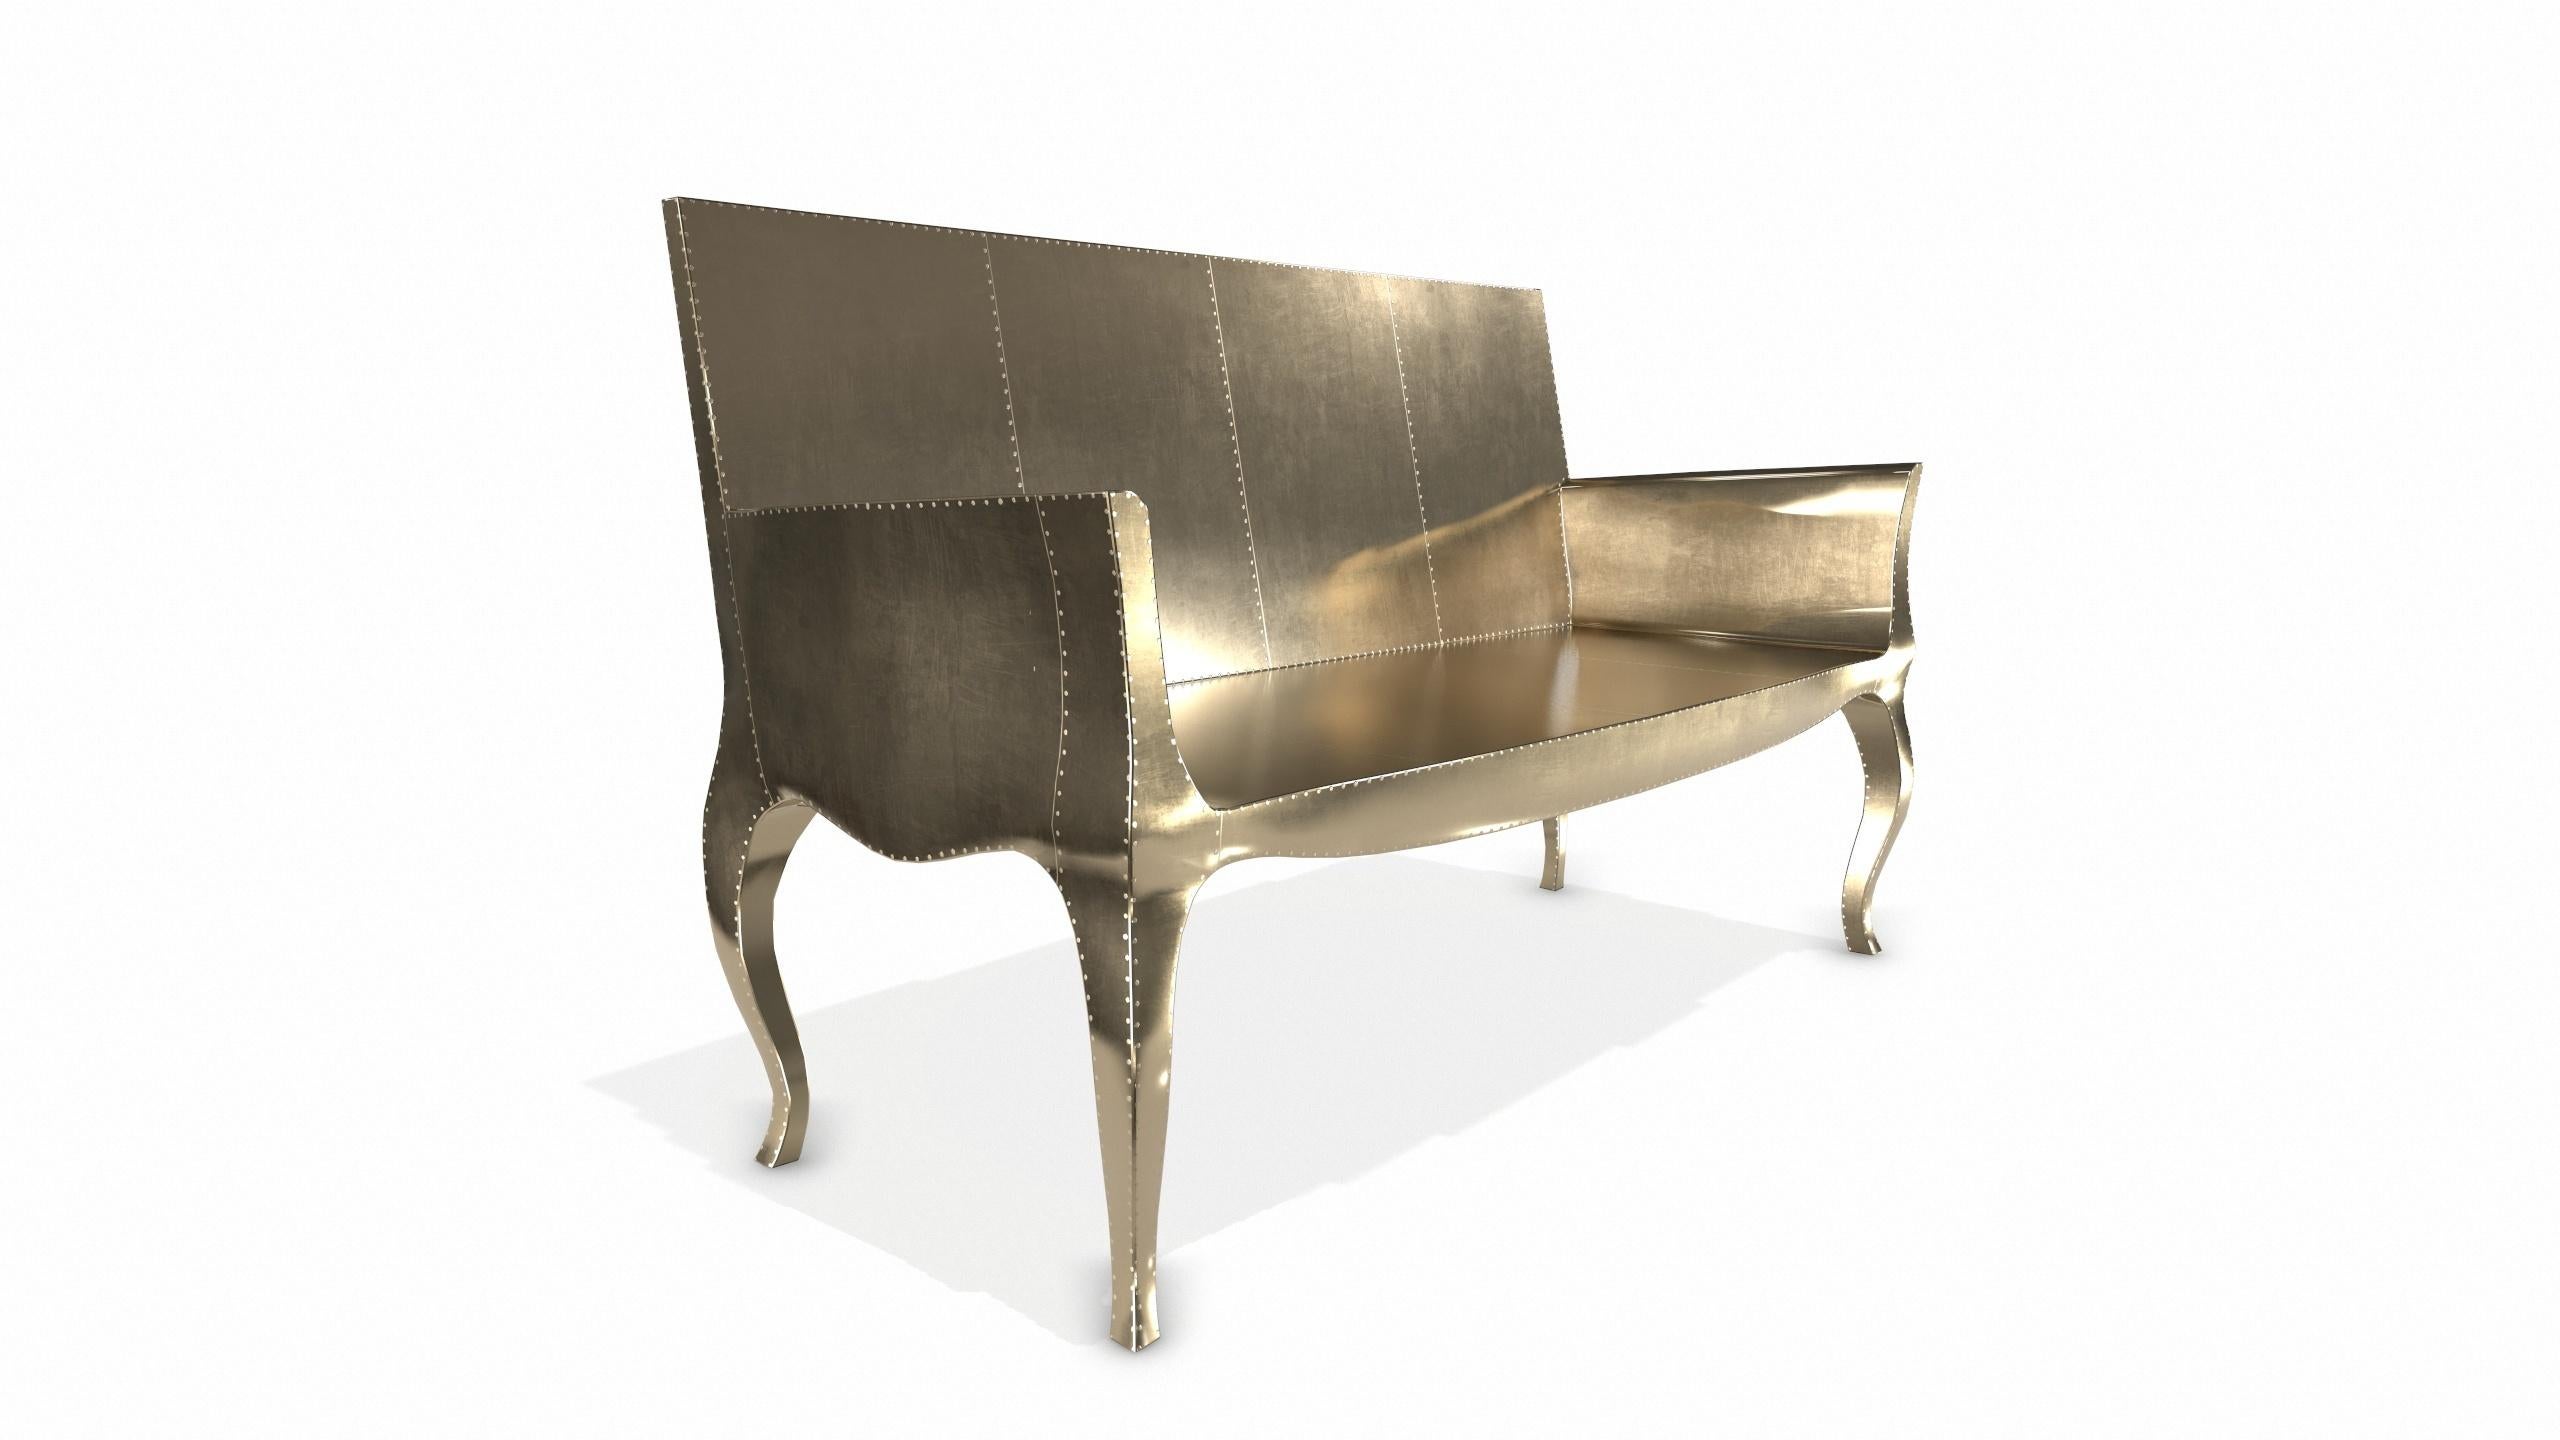 Louise Settee Art Deco Benches in Smooth Brass by Paul Mathieu for S Odegard In New Condition For Sale In New York, NY